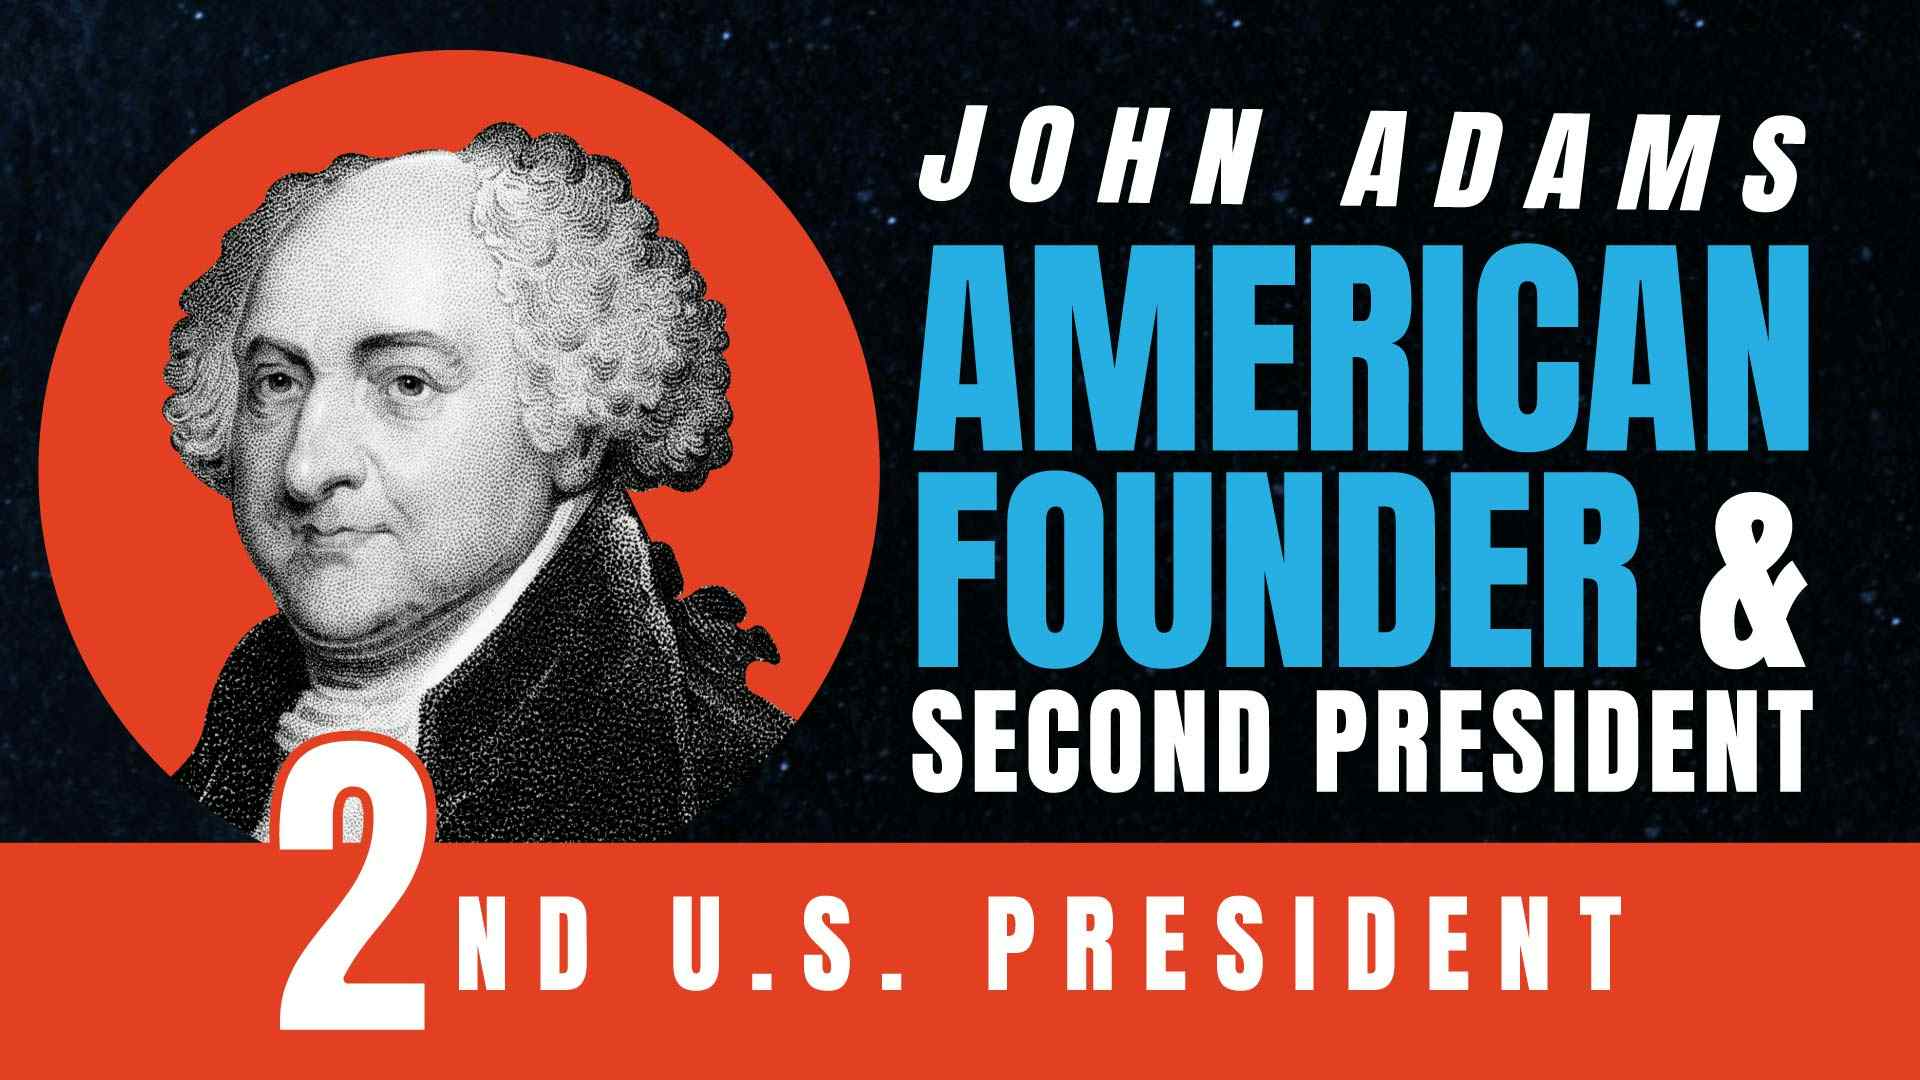 John Adams: American Founder and Second President